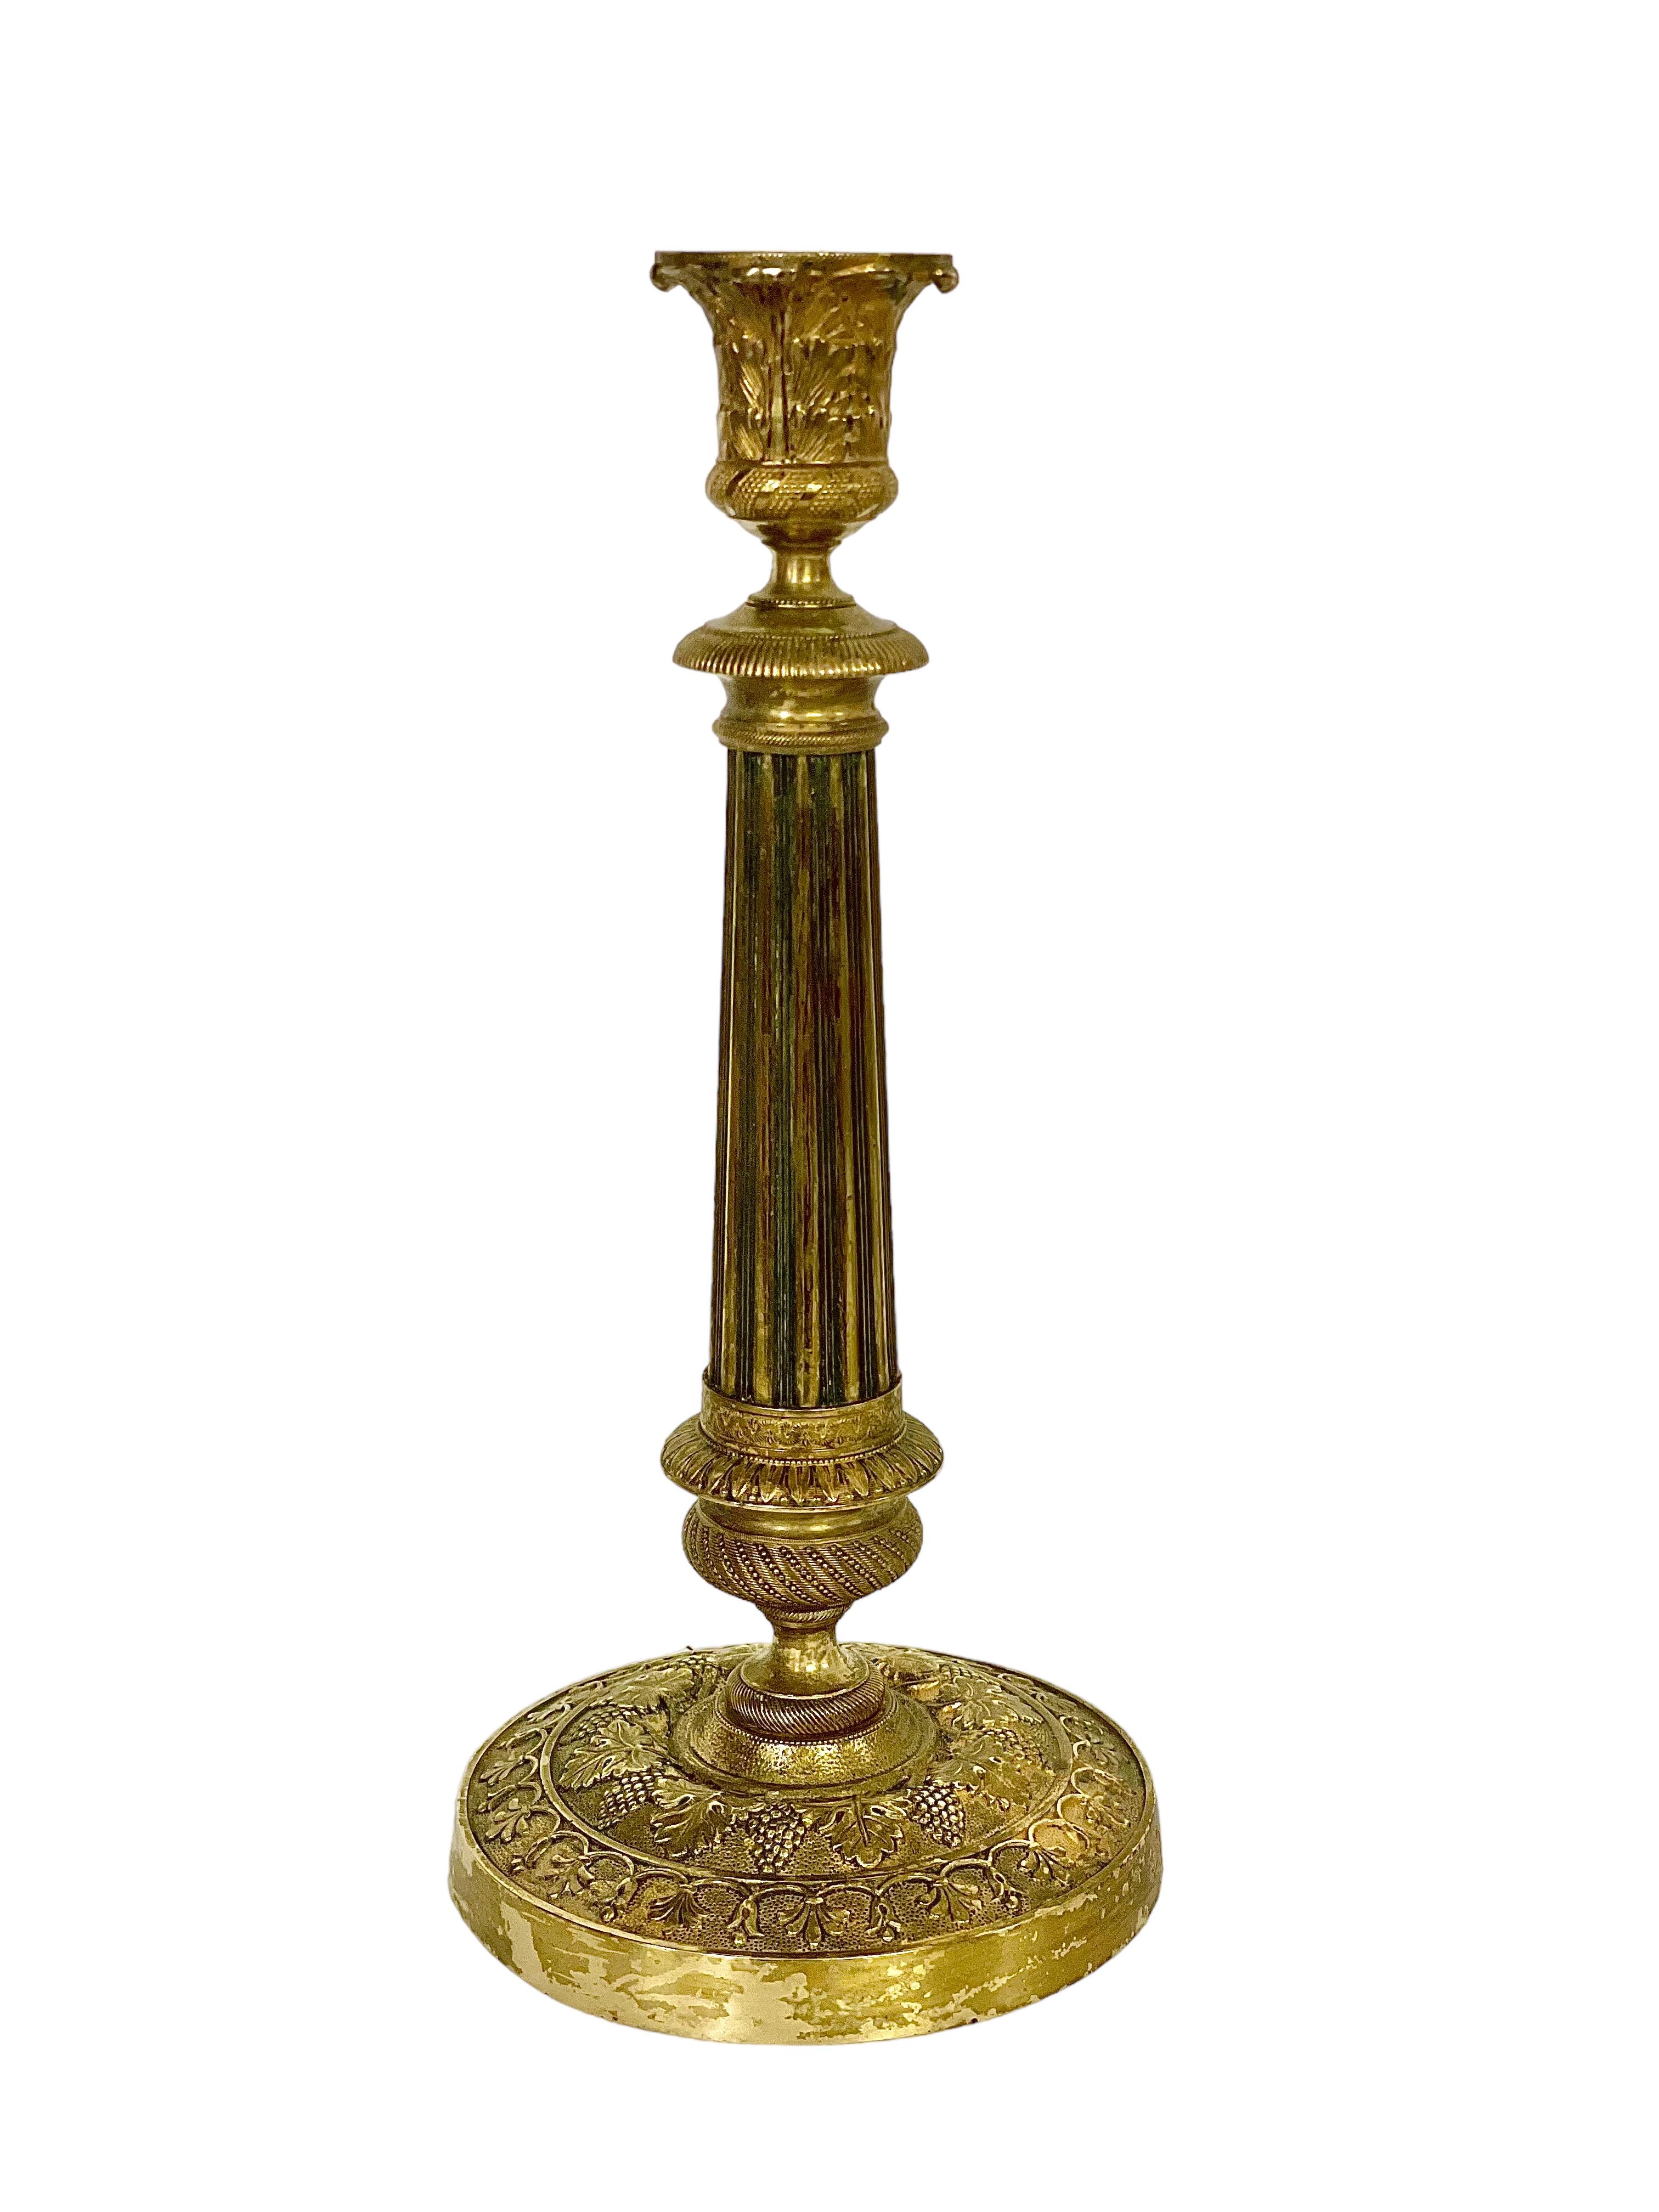 Pair of Gilt Bronze Neoclassical Candlesticks 19th Century For Sale 5